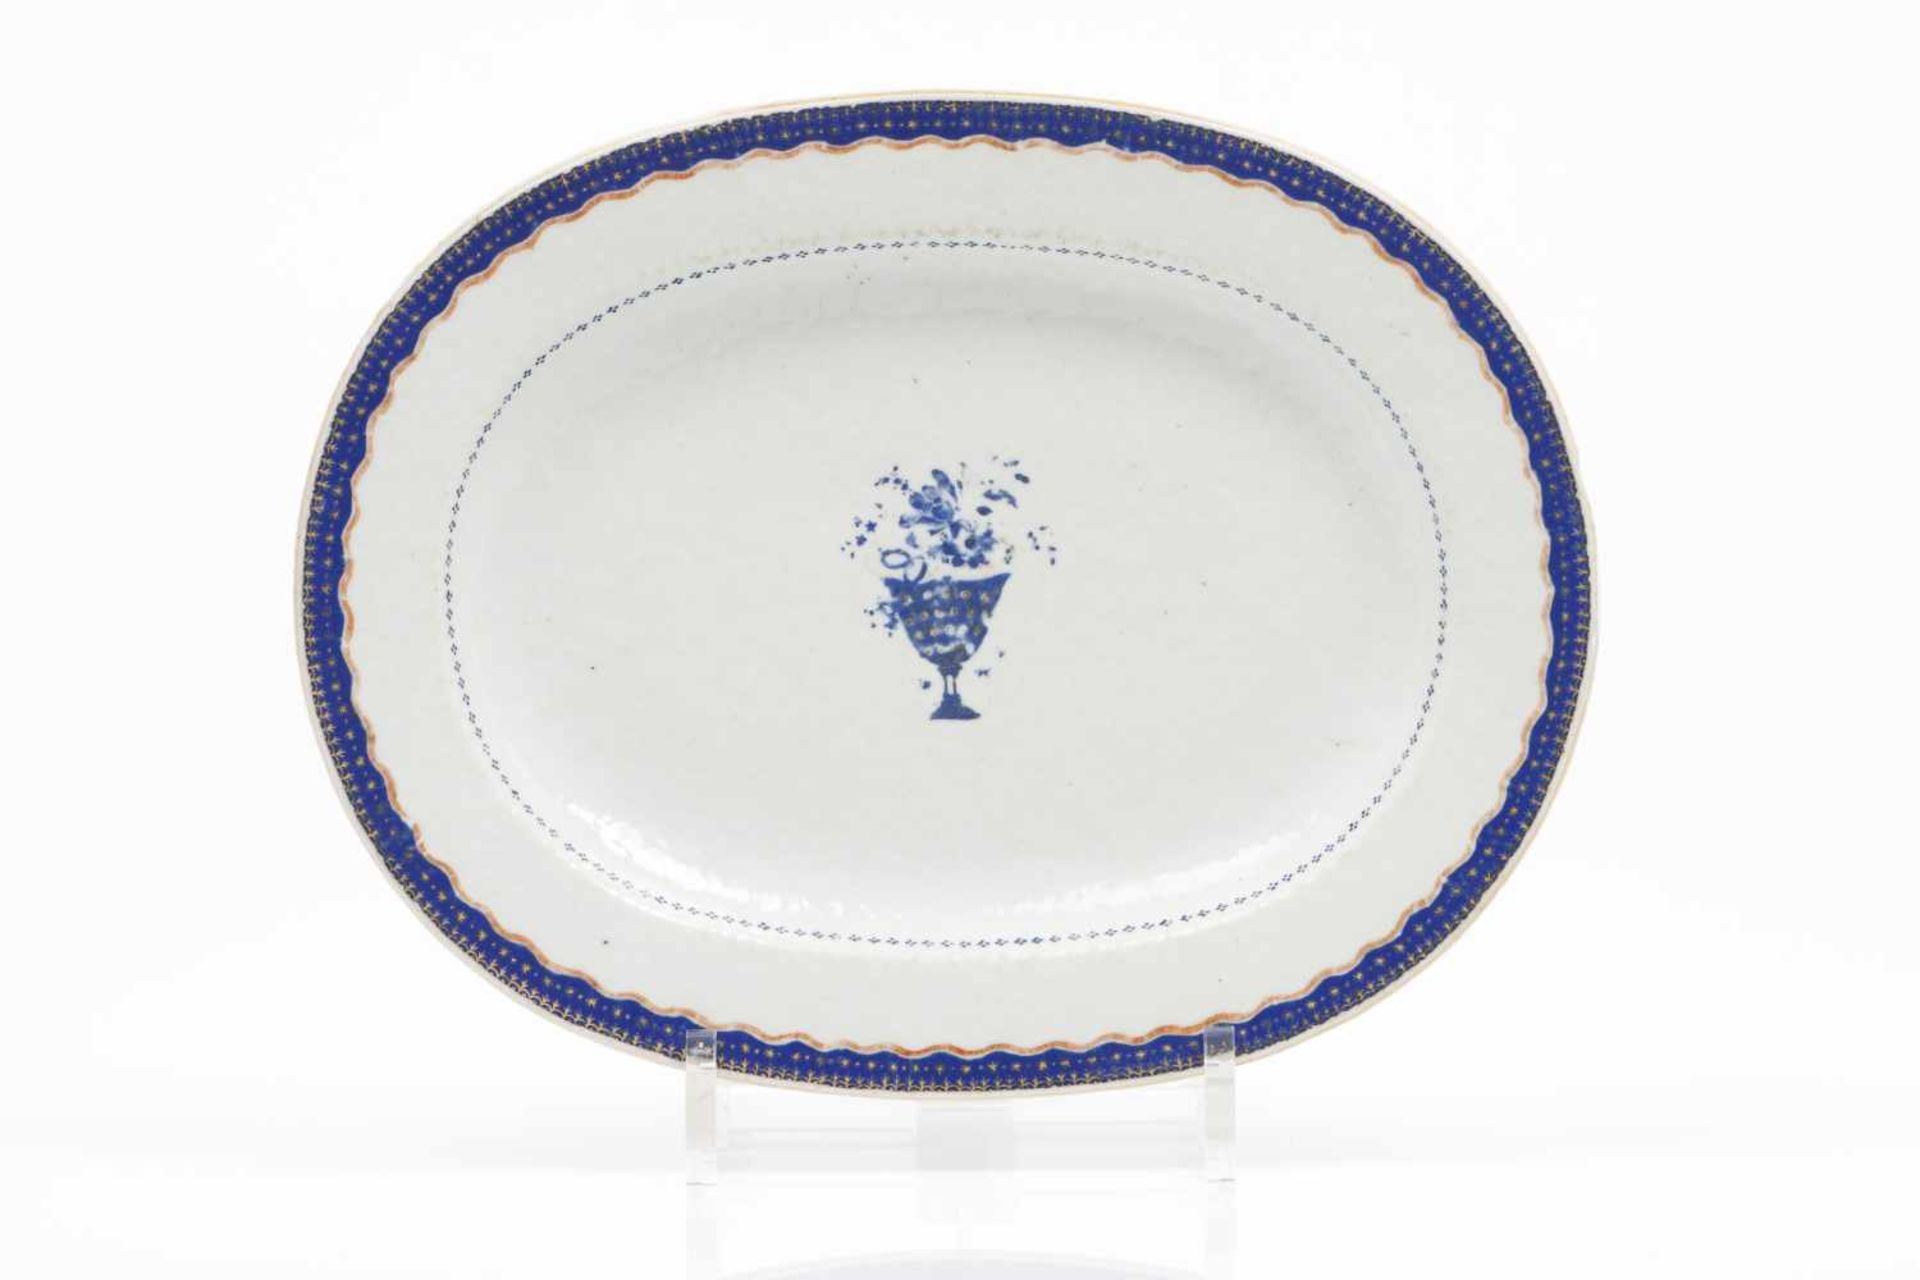 A small trayChinese export porcelainBlue, iron oxide and gilt decorationQianlong reign (1736-1795)